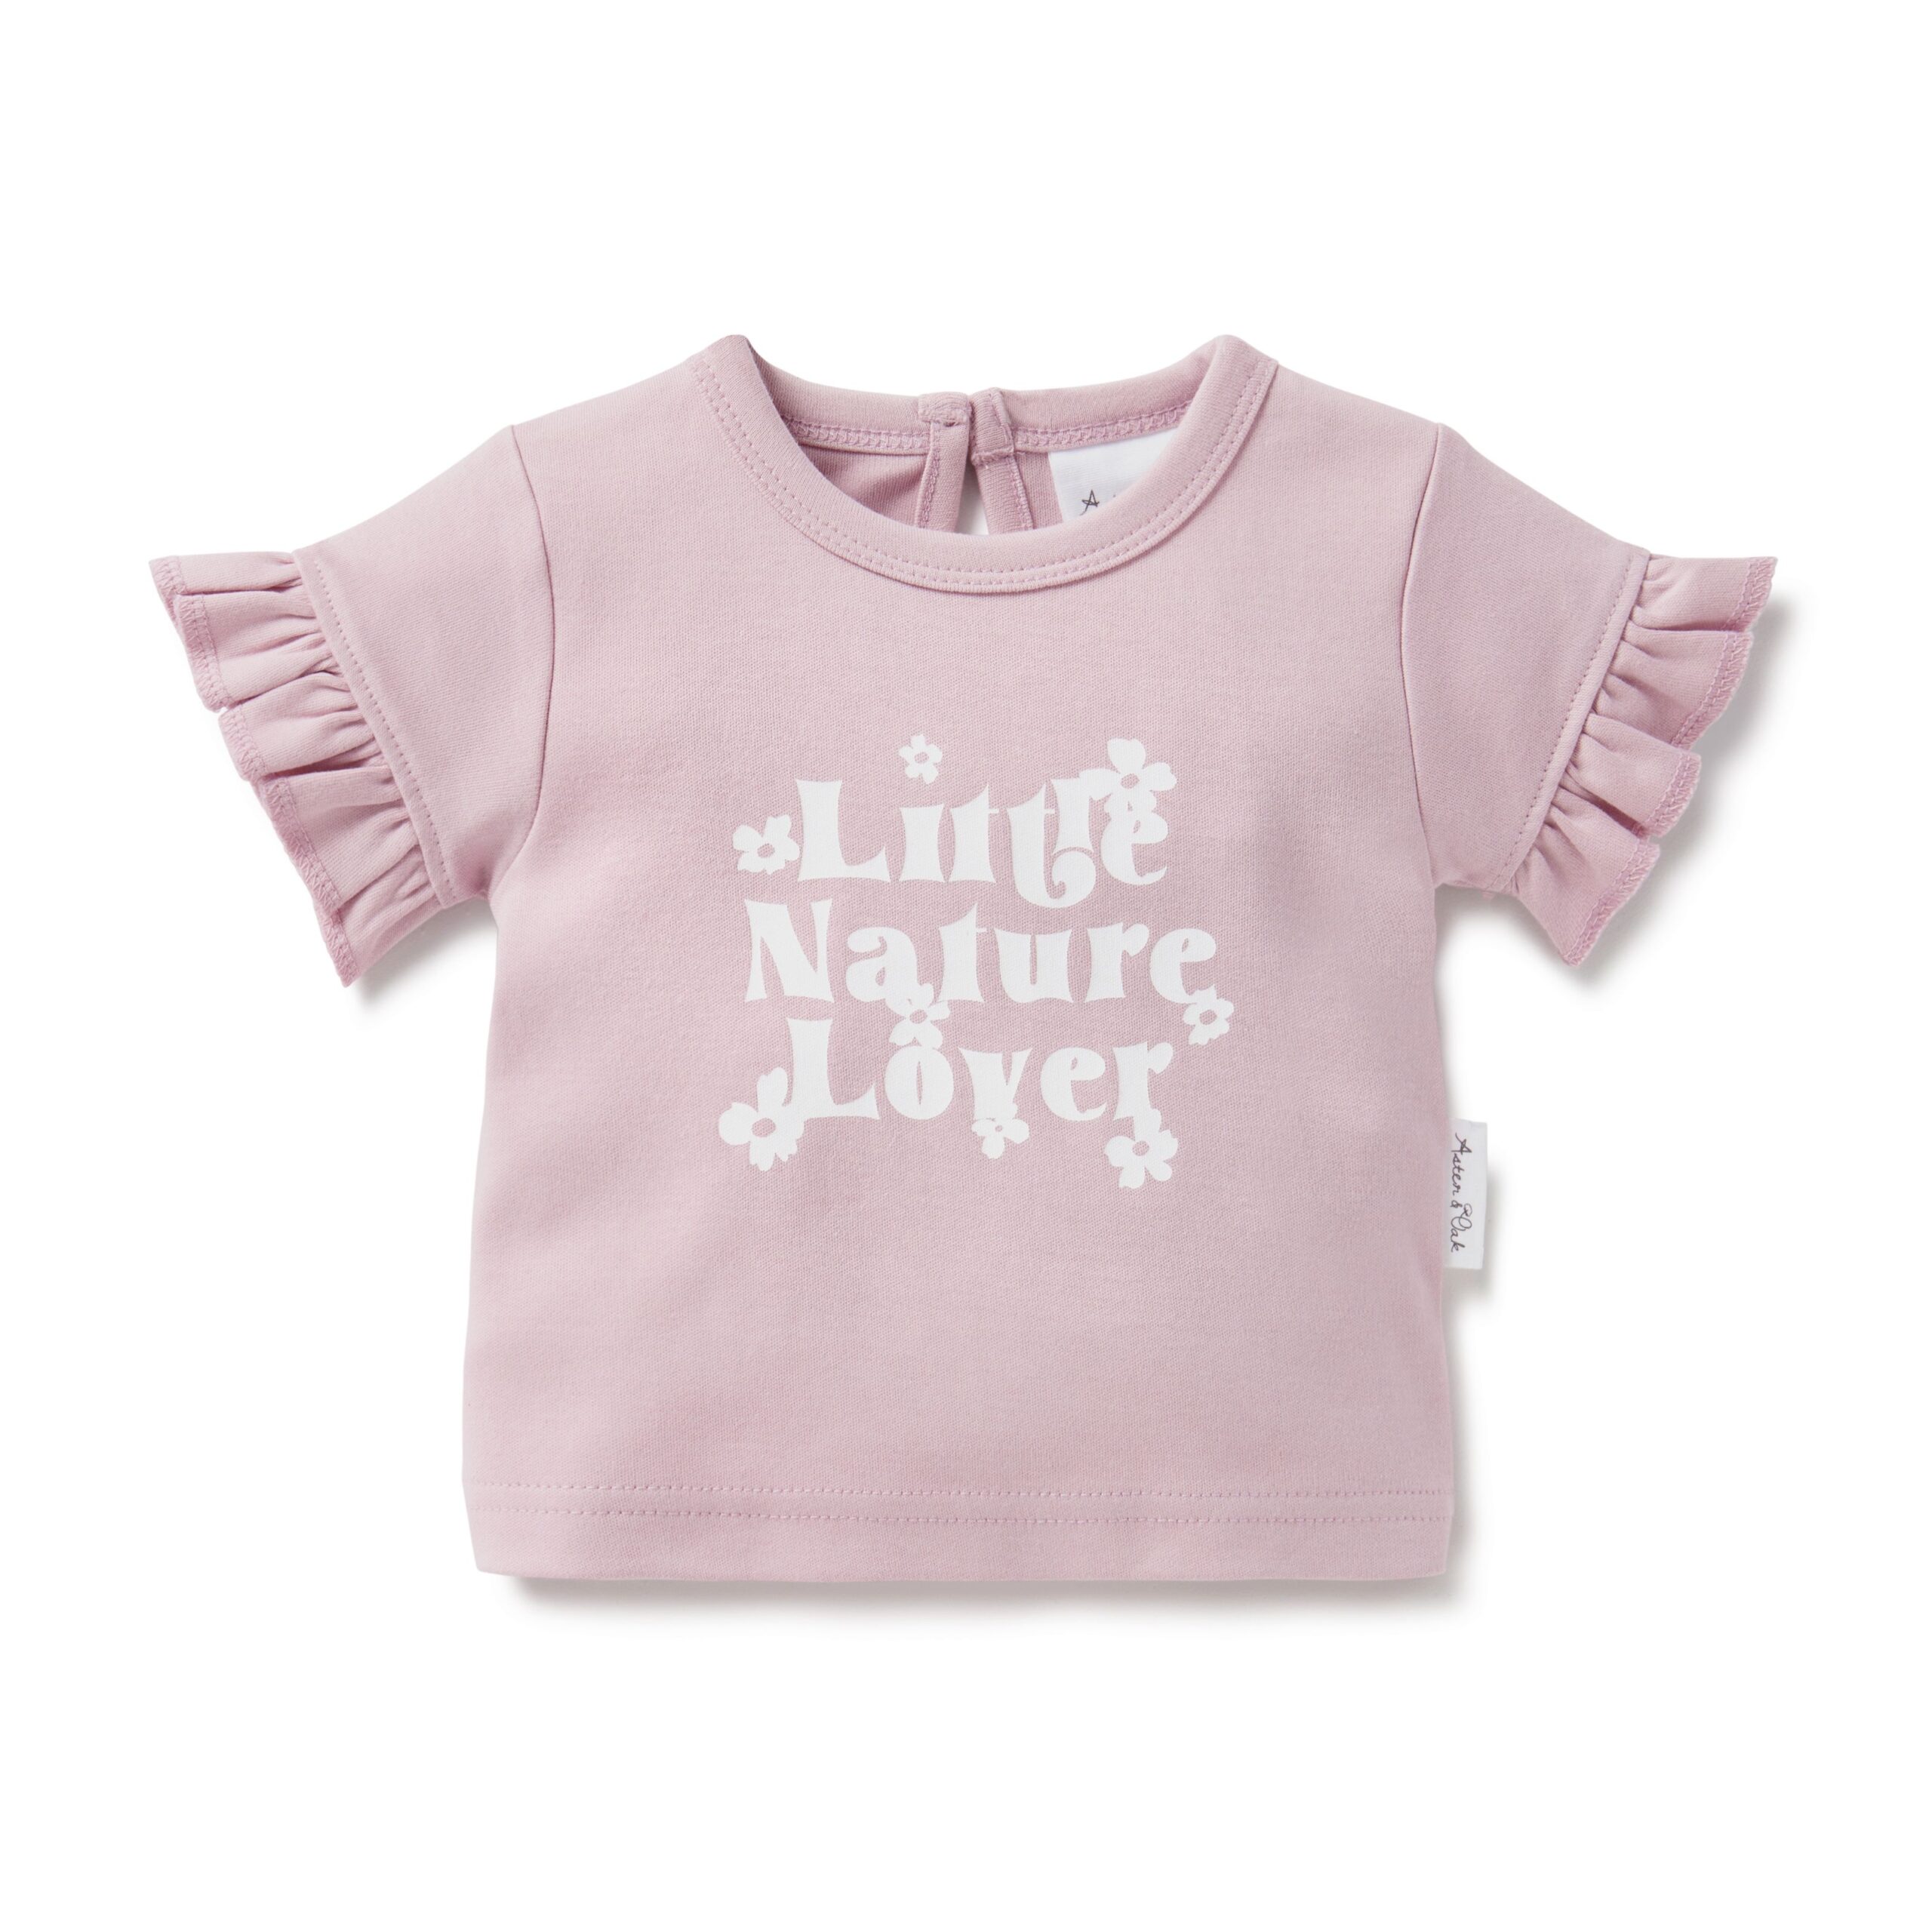 aster oak nature lover tee scaled